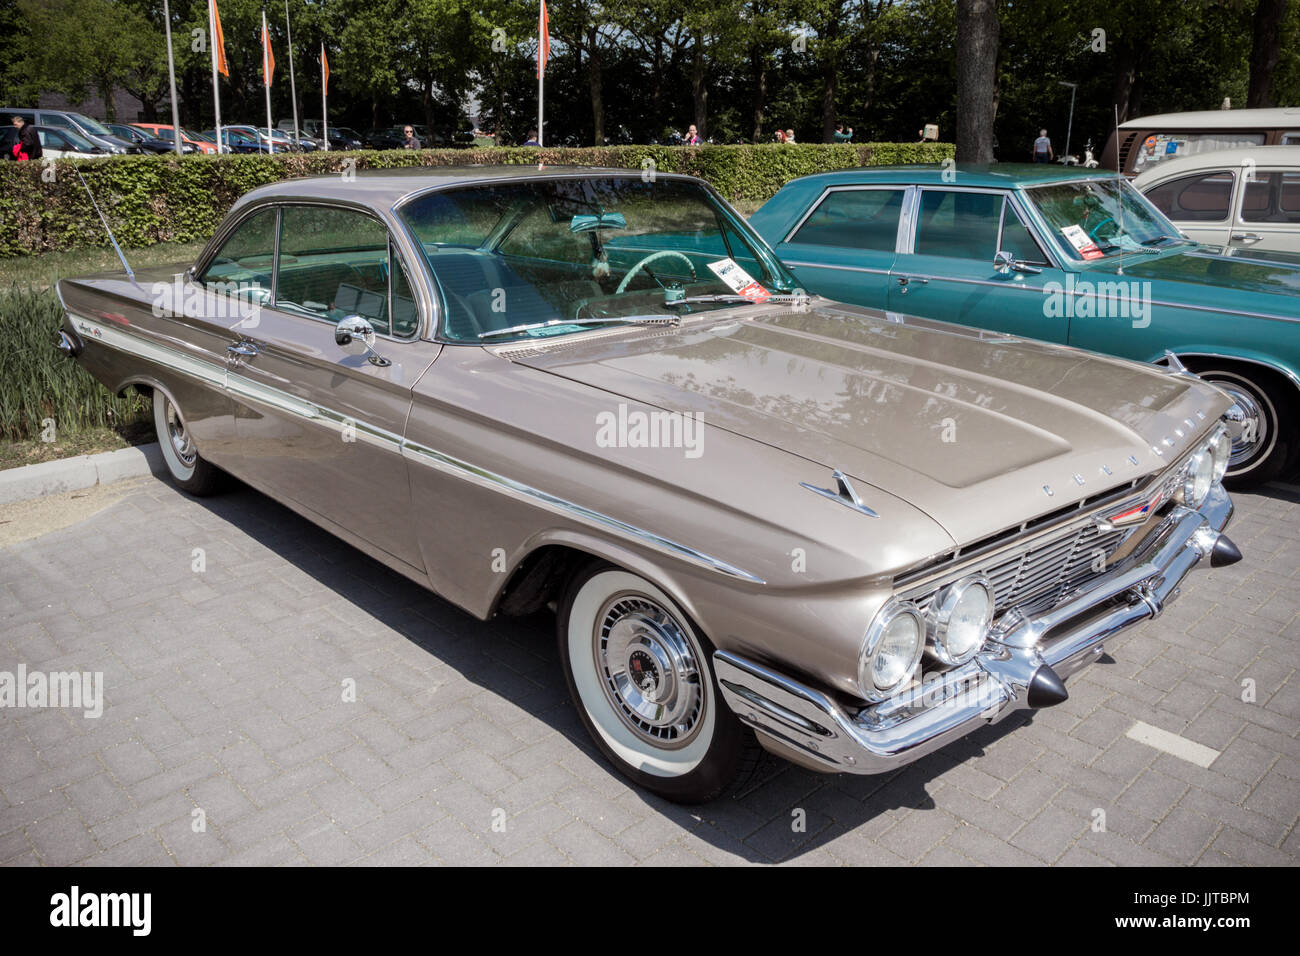 DEN BOSCH, THE NETHERLANDS - MAY 10, 2015: Brown 1961 Chevrolet Impala Coupe classic car. Stock Photo